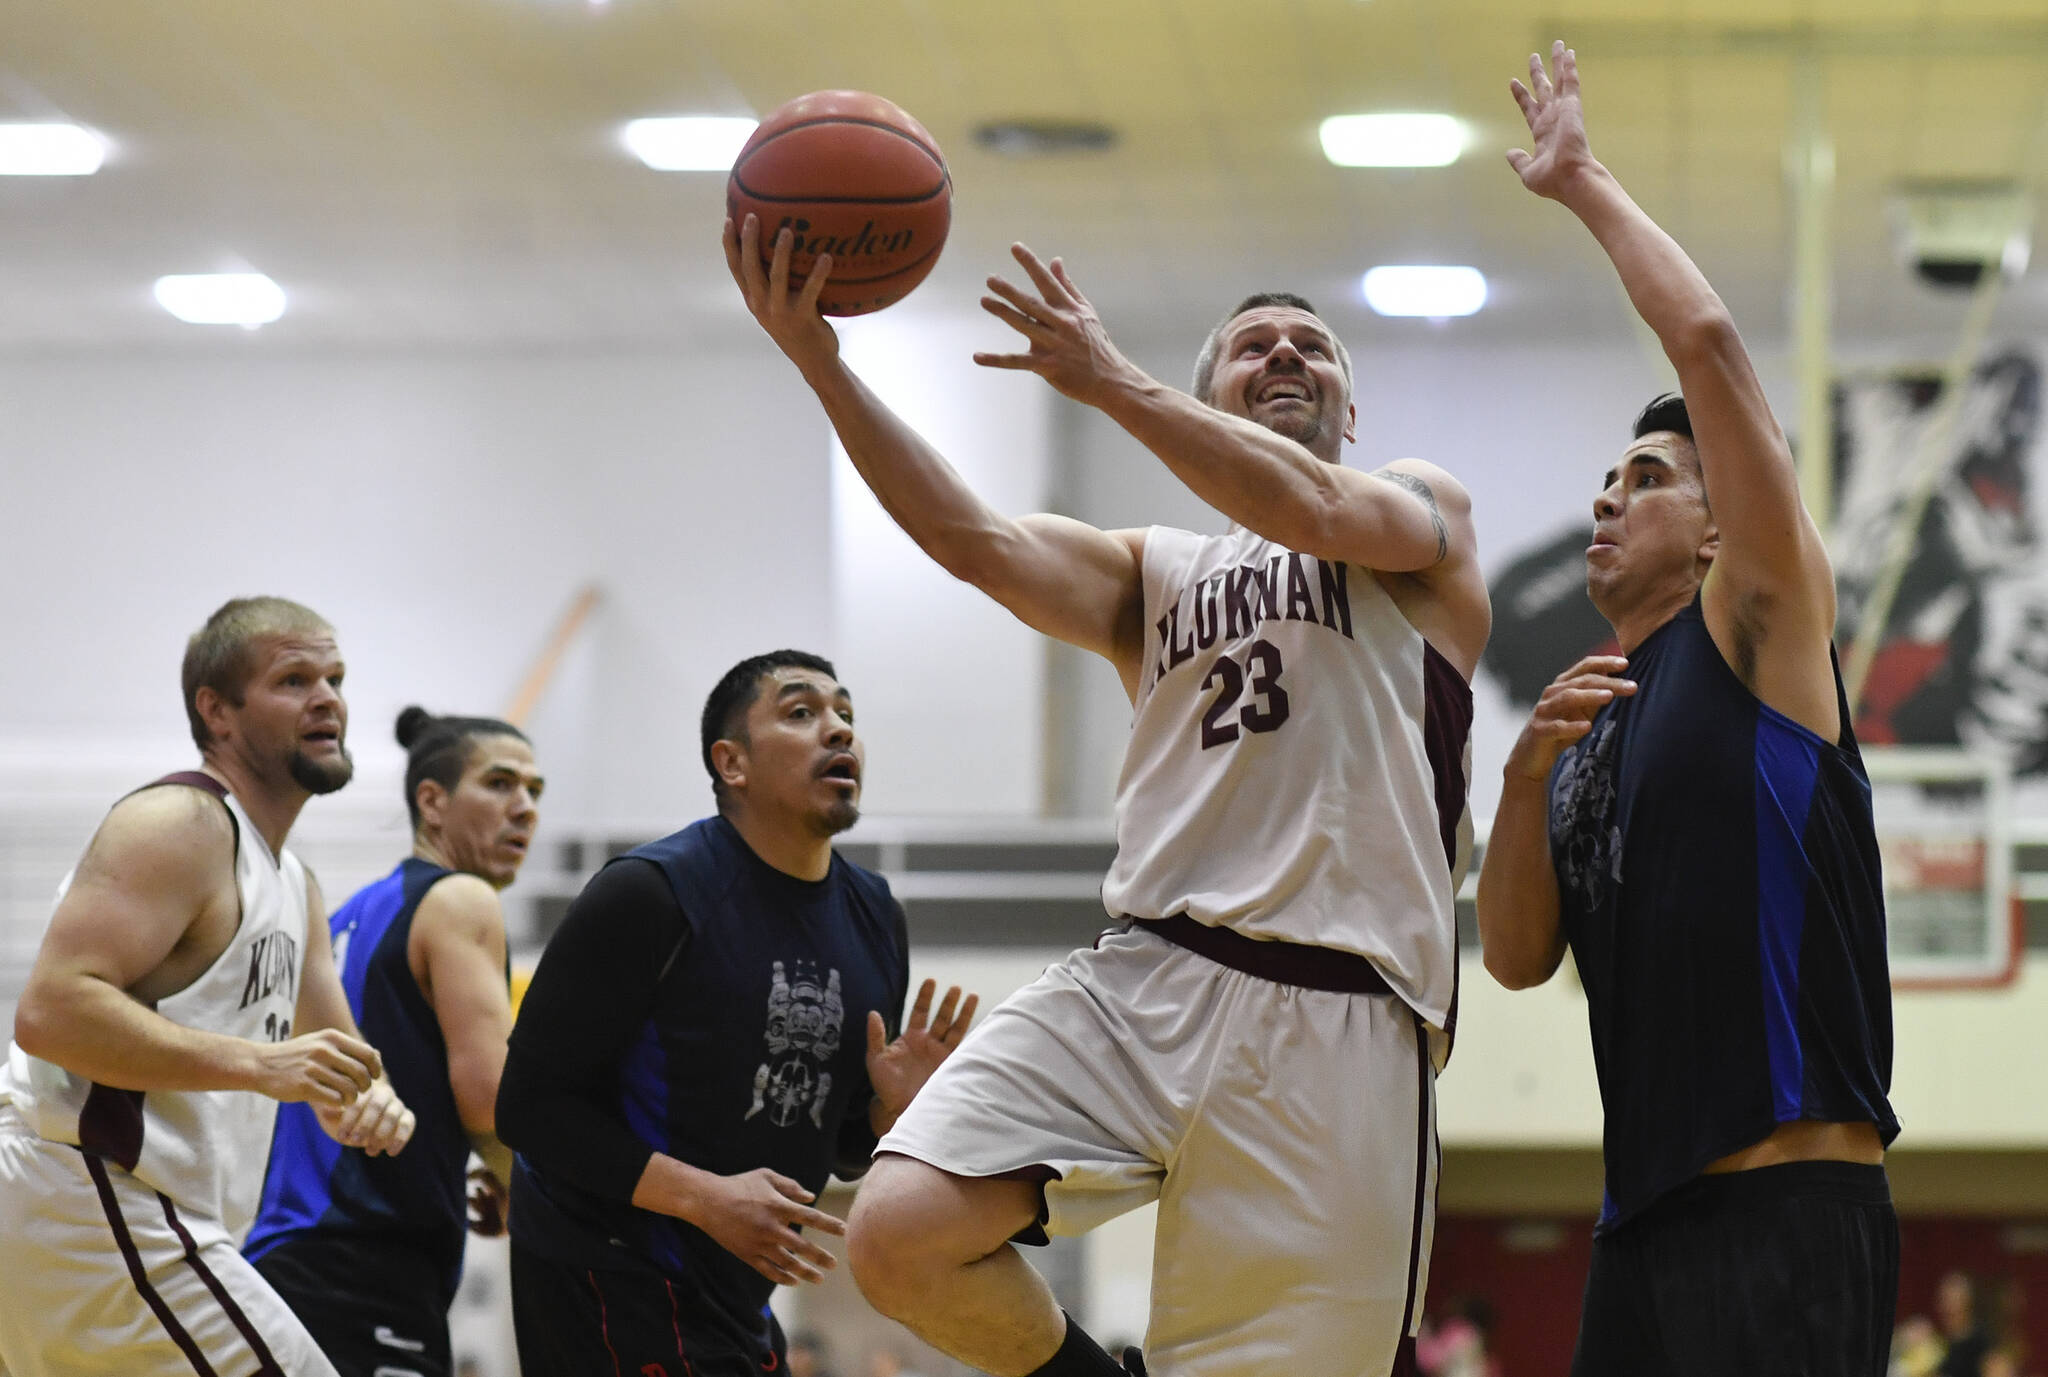 Klukwan’s Michael Ganey, center, shoots against Hydaburg’s Ben Young in the C final at the 2019 Gold Medal Basketball Tournament. The tournament returns this March after a three-year hiatus due to the pandemic. (Michael Penn / Juneau Empire File)